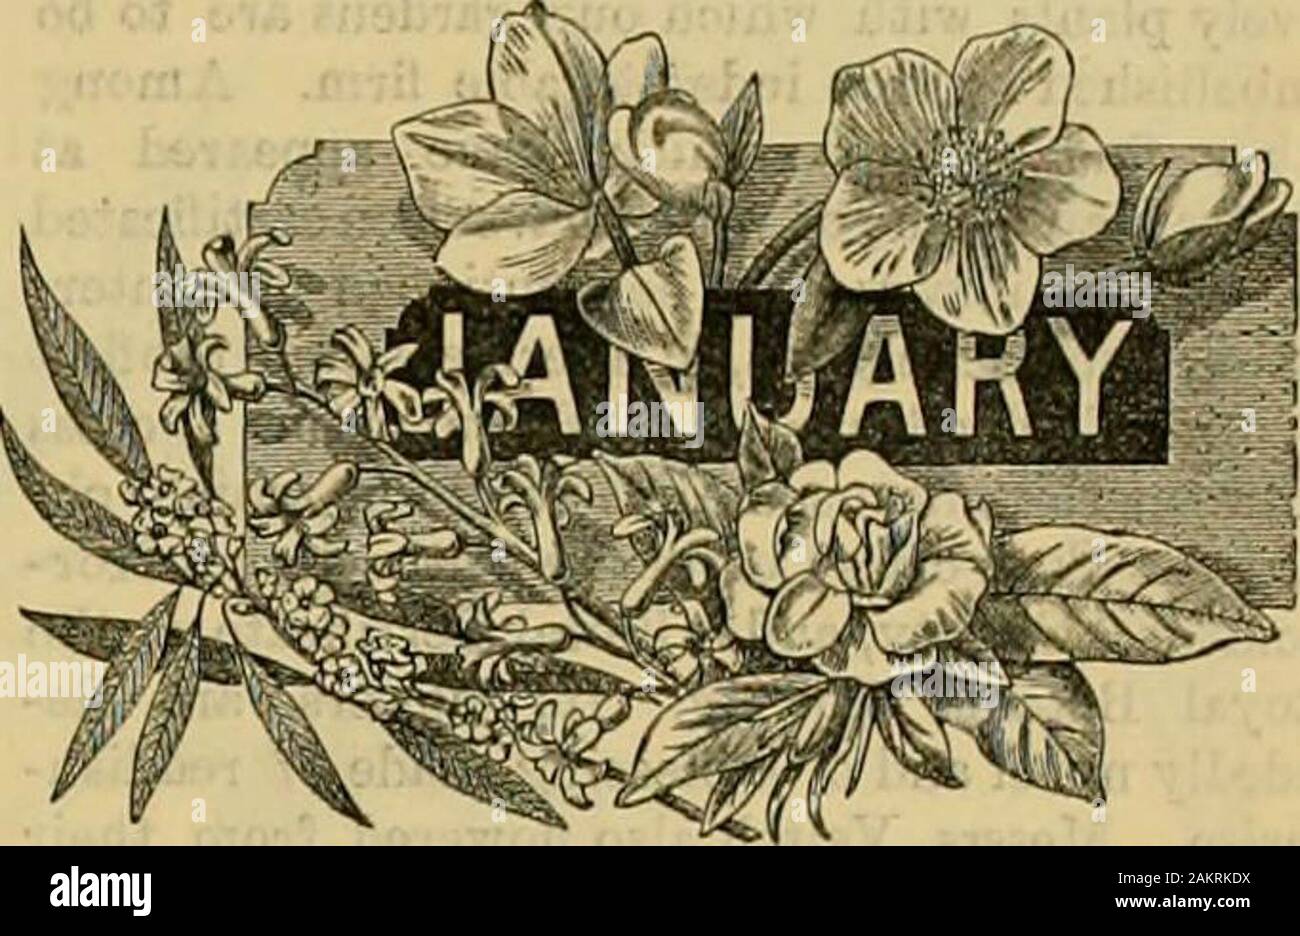 The Gardeners' chronicle : a weekly illustrated journal of horticulture and allied subjects . ongestheeper. CAXJLI-ELOWEB. Per Ounce, 2s. Gd. CELEBY. Per Packet, Is. CELEBY. Per Packet. Is. CUCTTM-BEB. PerPaoket. Is.Srf. ENDIVE. Per Packet. Is. LETTUCE. Per Packet, Is. LEEK. Per Packet, Is. MELON. PerPacket.ls.6t/. ONION. PerPacket.ls. (jrf. Williams Champion Moss I PABSLBY Curled The finest Curled variety. I Per OBnce. Is. Williams ImprovedEarly The be^t early white Pea. Williams Golden Gueen The best yellow Tomato, PEA. Per Quart, Is. W. TOMATO. Per Packet. Is. (Awarded Tirst class Certifica Stock Photo